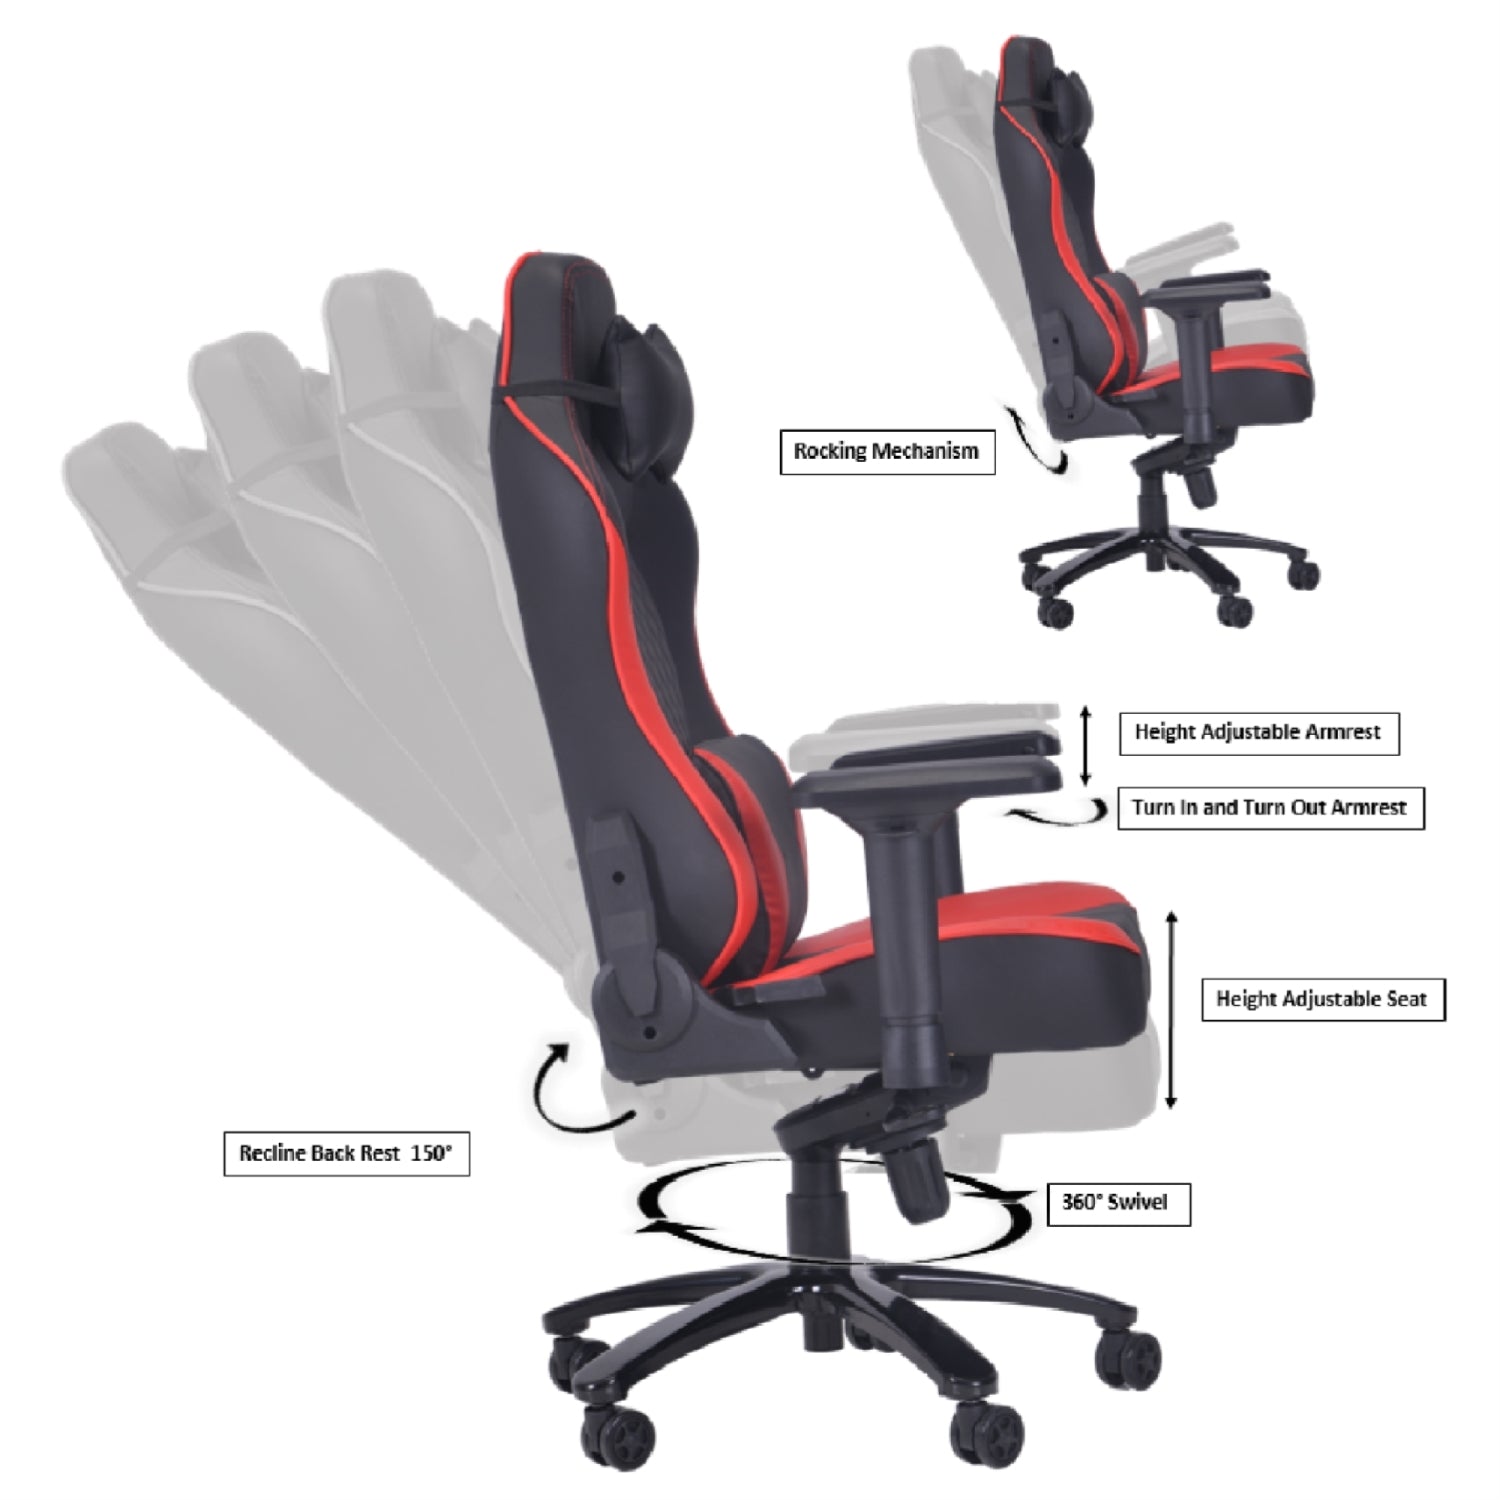 ViscoLogic MAZON ULTRA Series Racing Sports Style Sturdy Swivel Reclining Adjustable Computer Gaming Chair (Black & Red)